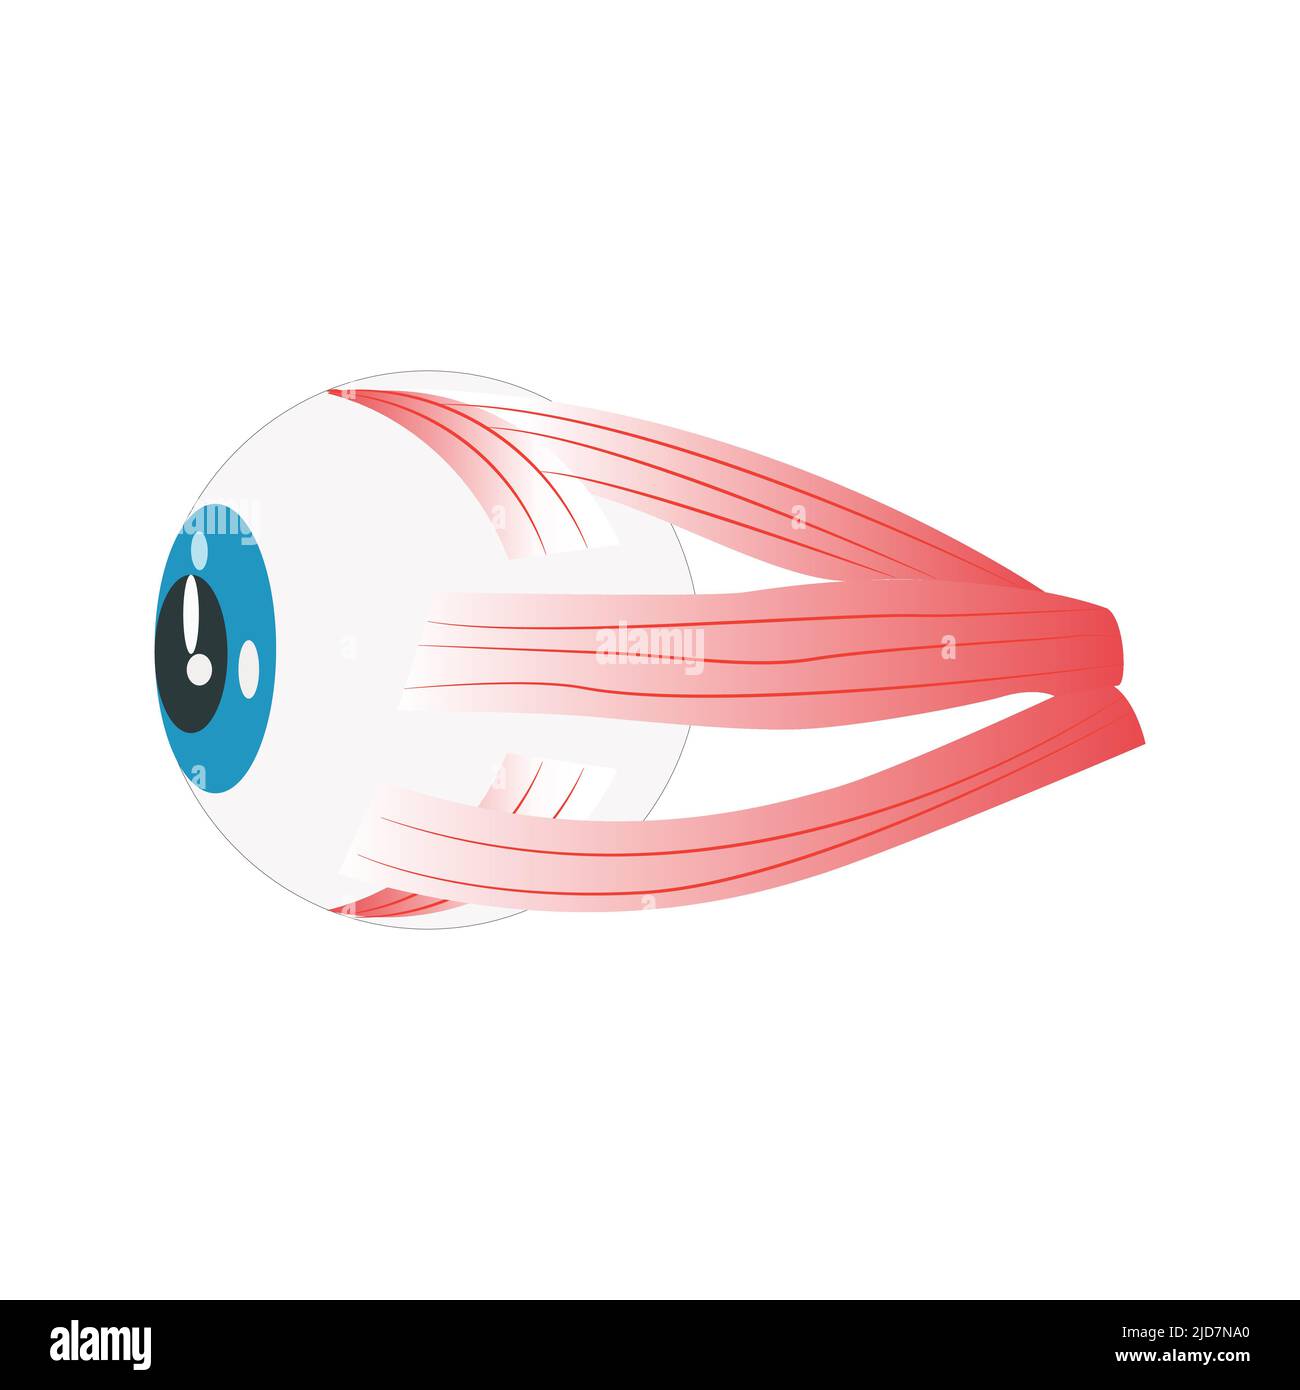 Components of the human eye. Illustration about Anatomy and Physiology. Stock Vector